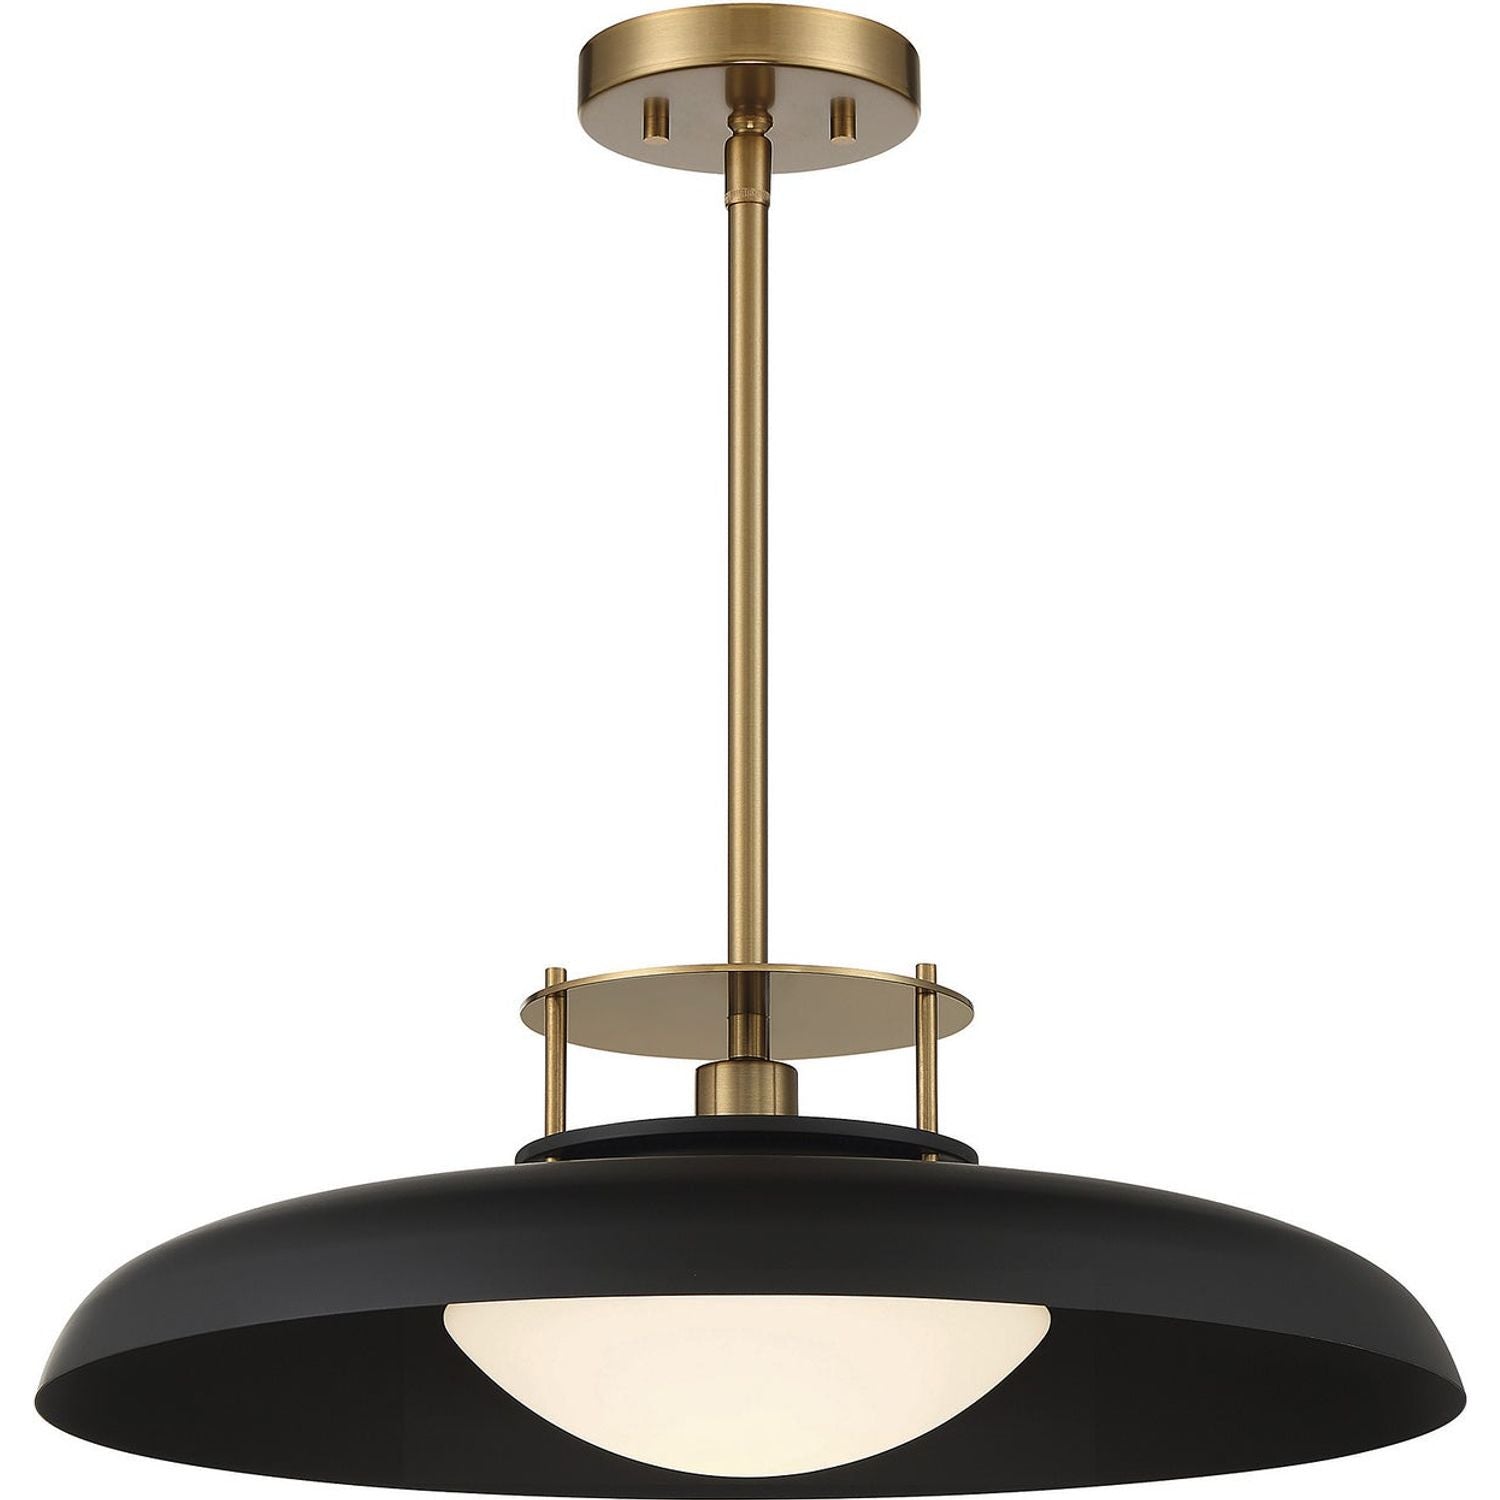 Savoy House - 7-1690-1-143 - One Light Pendant - Gavin - Matte Black with Warm Brass Accents